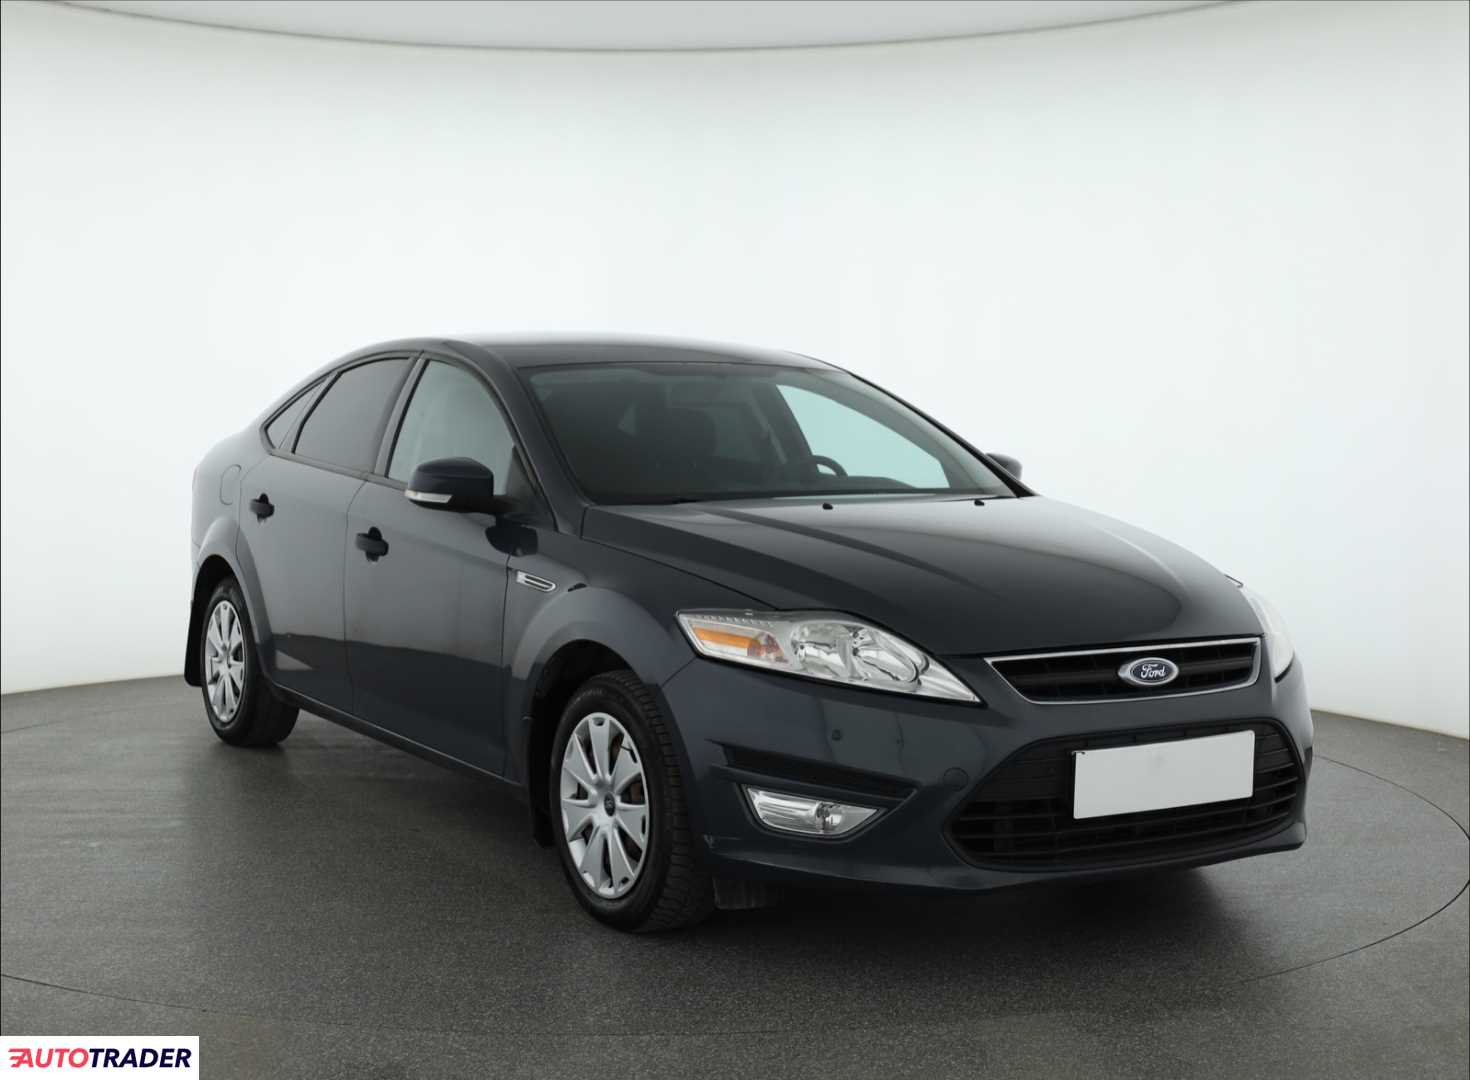 Ford Mondeo 2011 1.6 113 KM